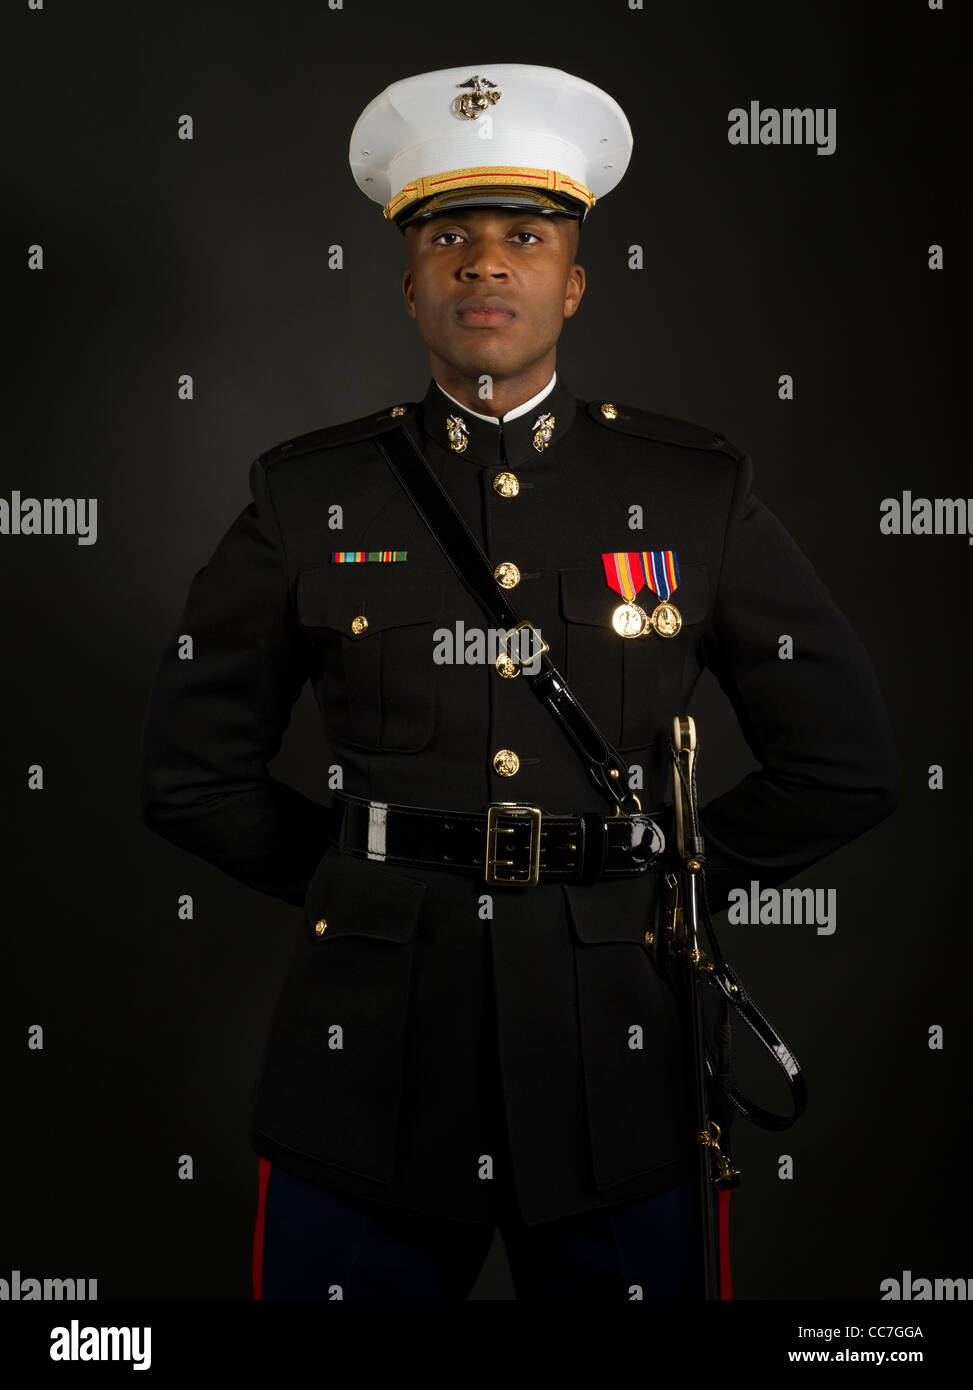 United States Marine Corps Officer